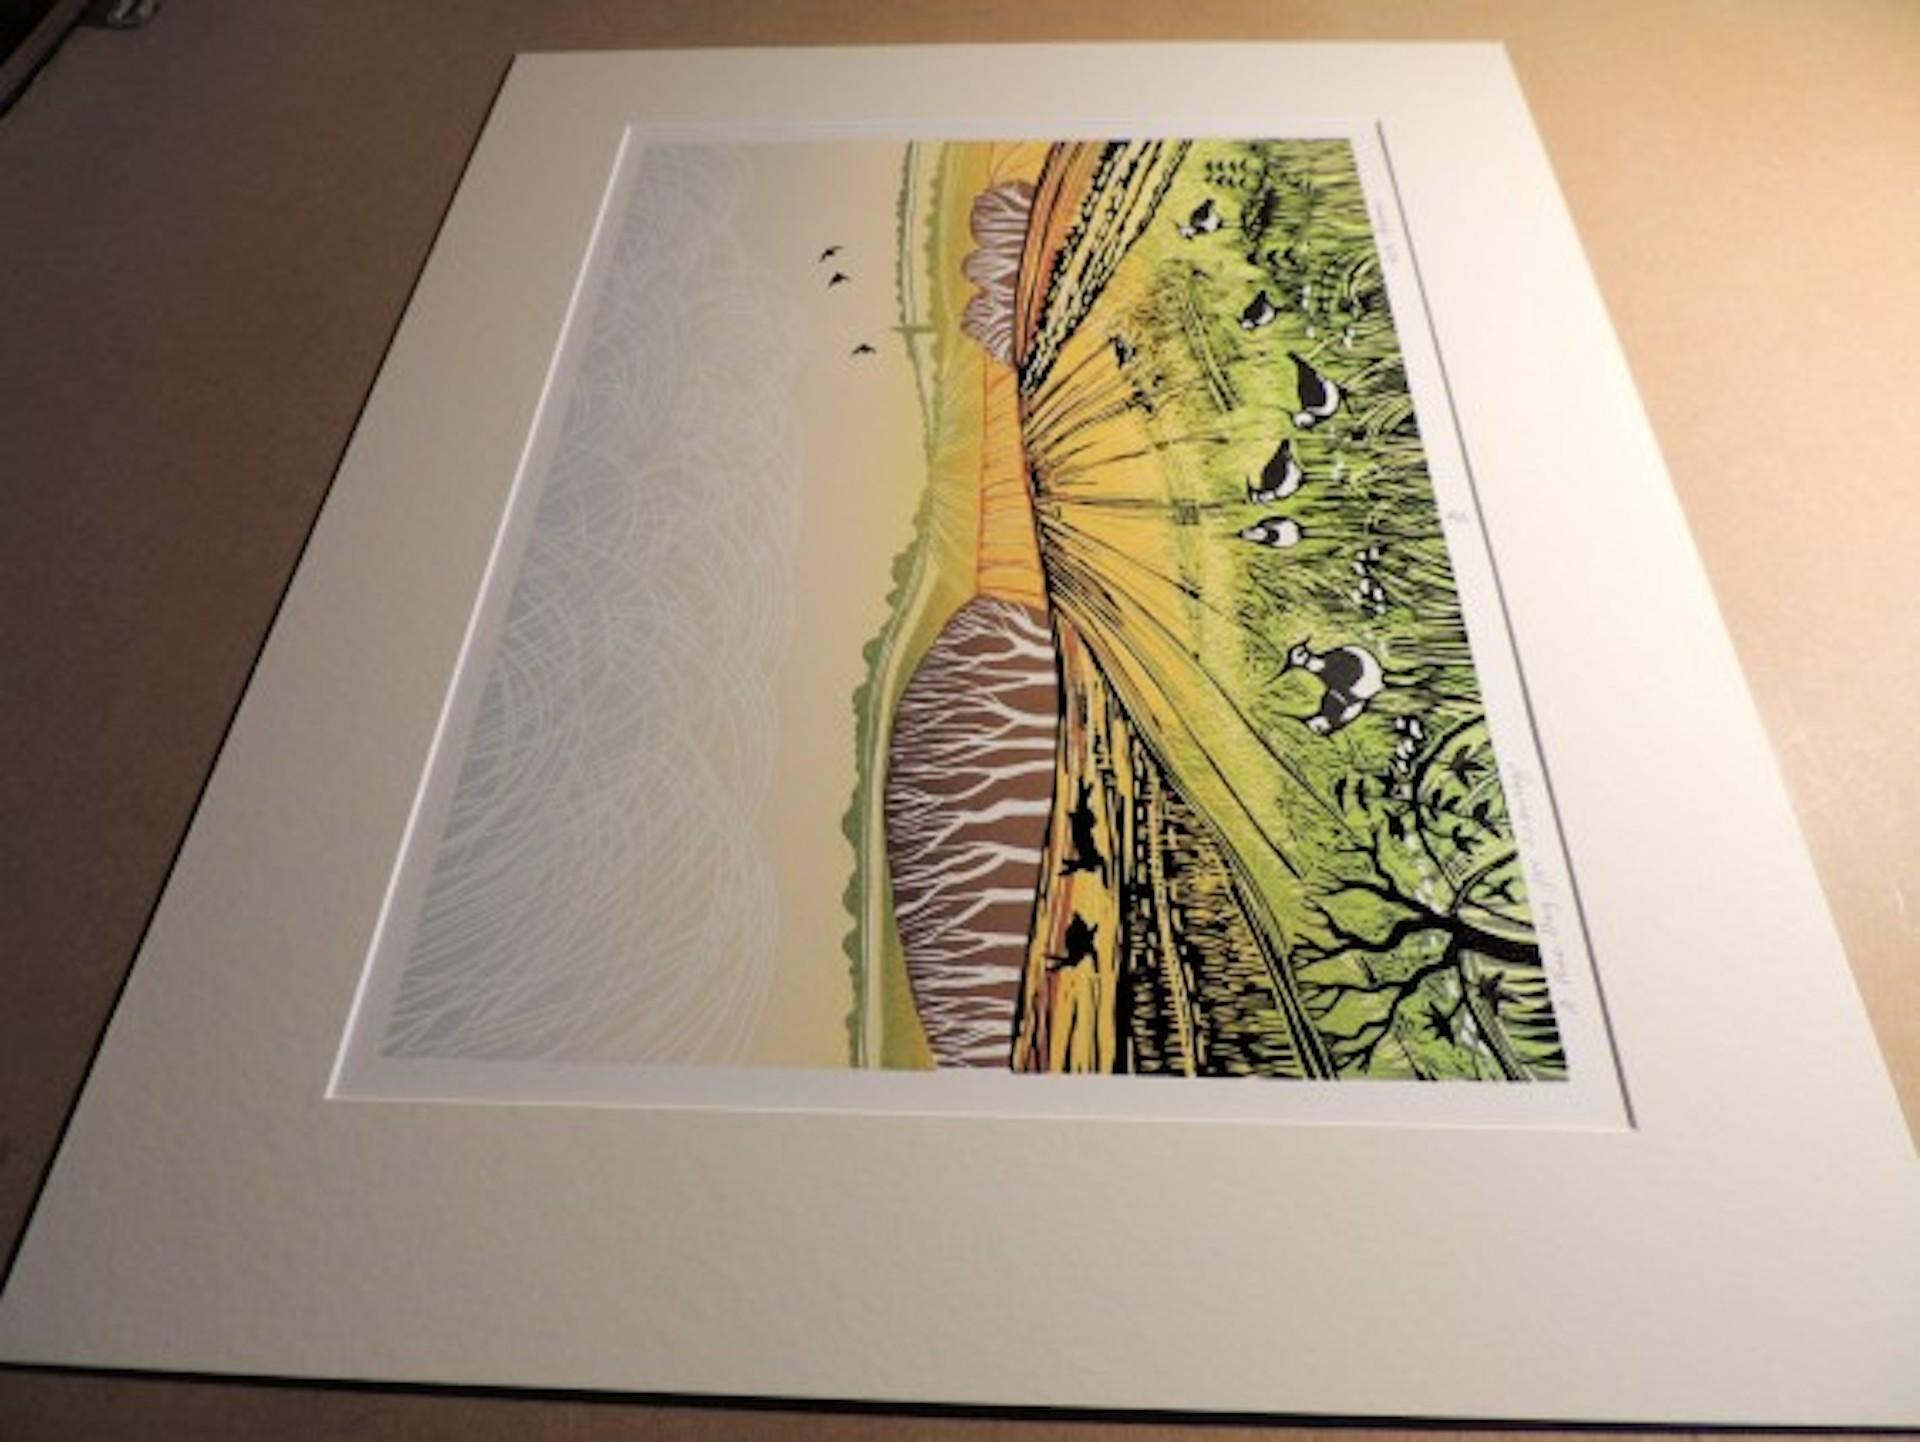 A Fine Day For Lapwings, Rob Barnes, Limited Edition Print, Landscape Artwork For Sale 7